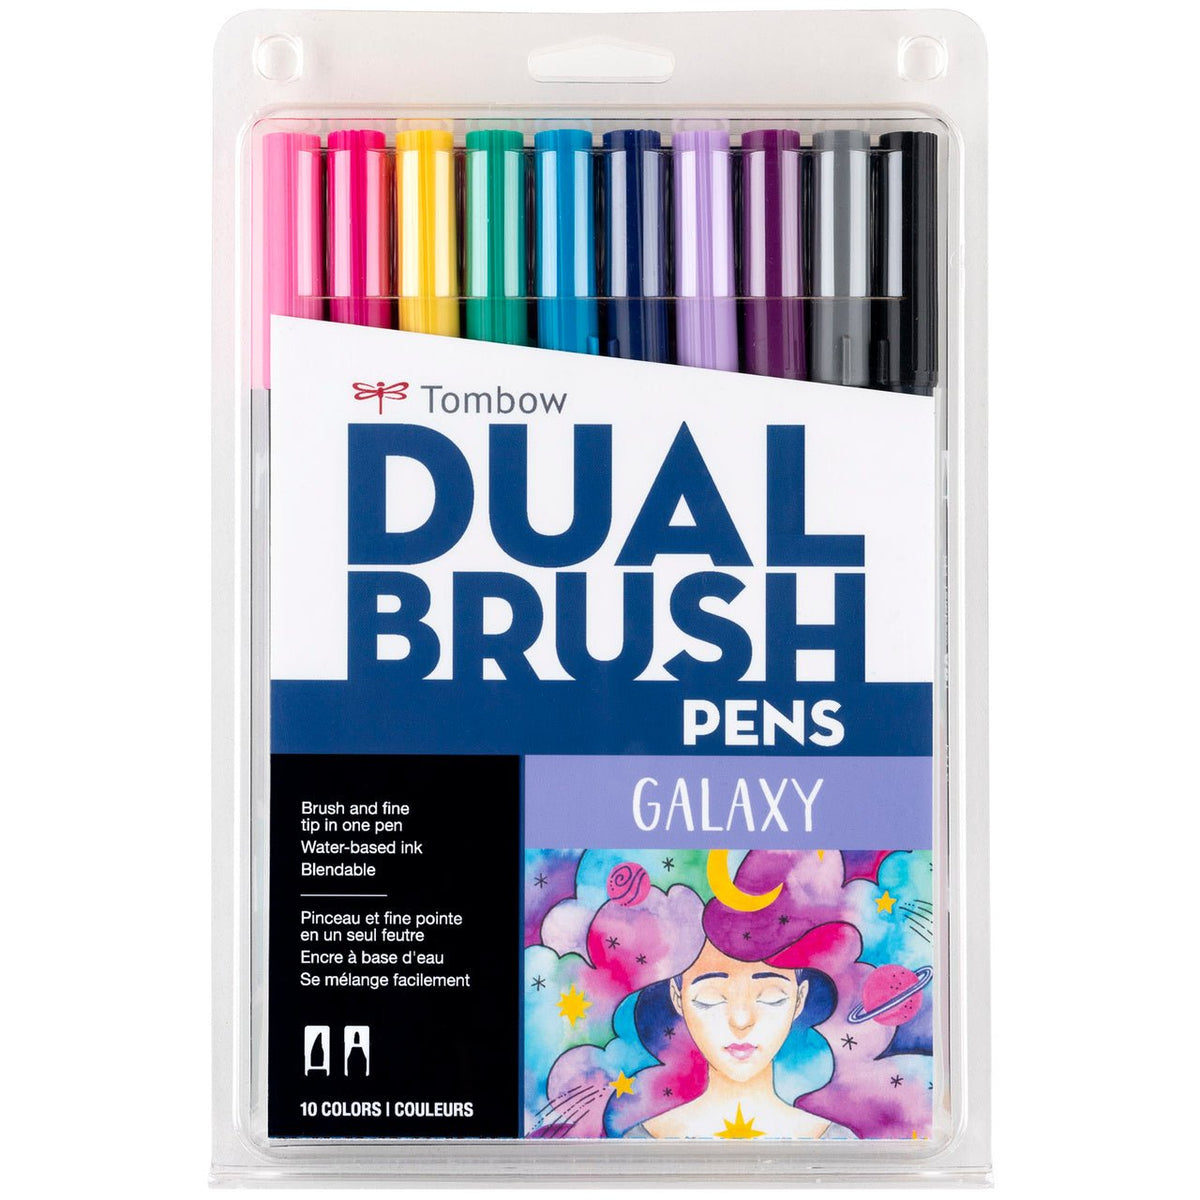 Tombow Dual Brush Marker Set of 10 - Galaxy Colors - merriartist.com